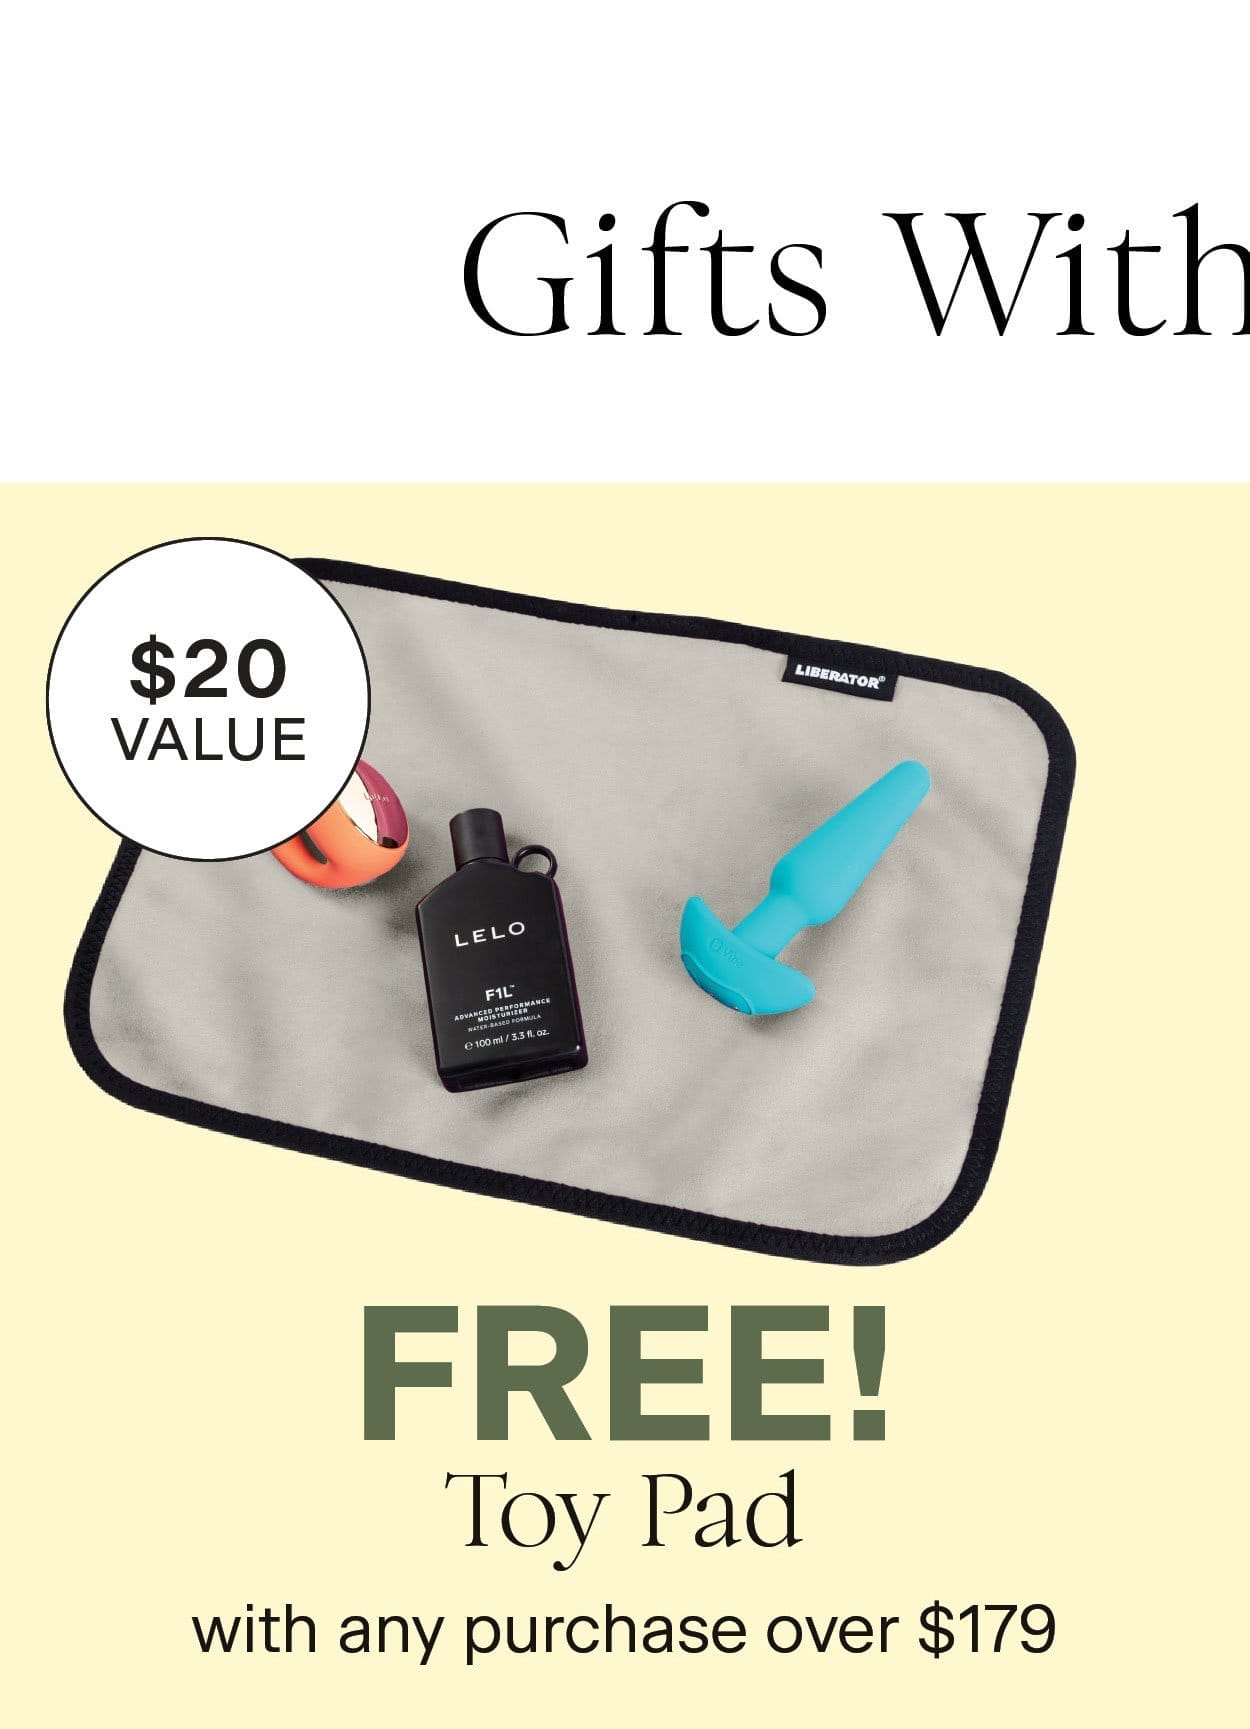 Free Toy Pad with any purchase over \\$179